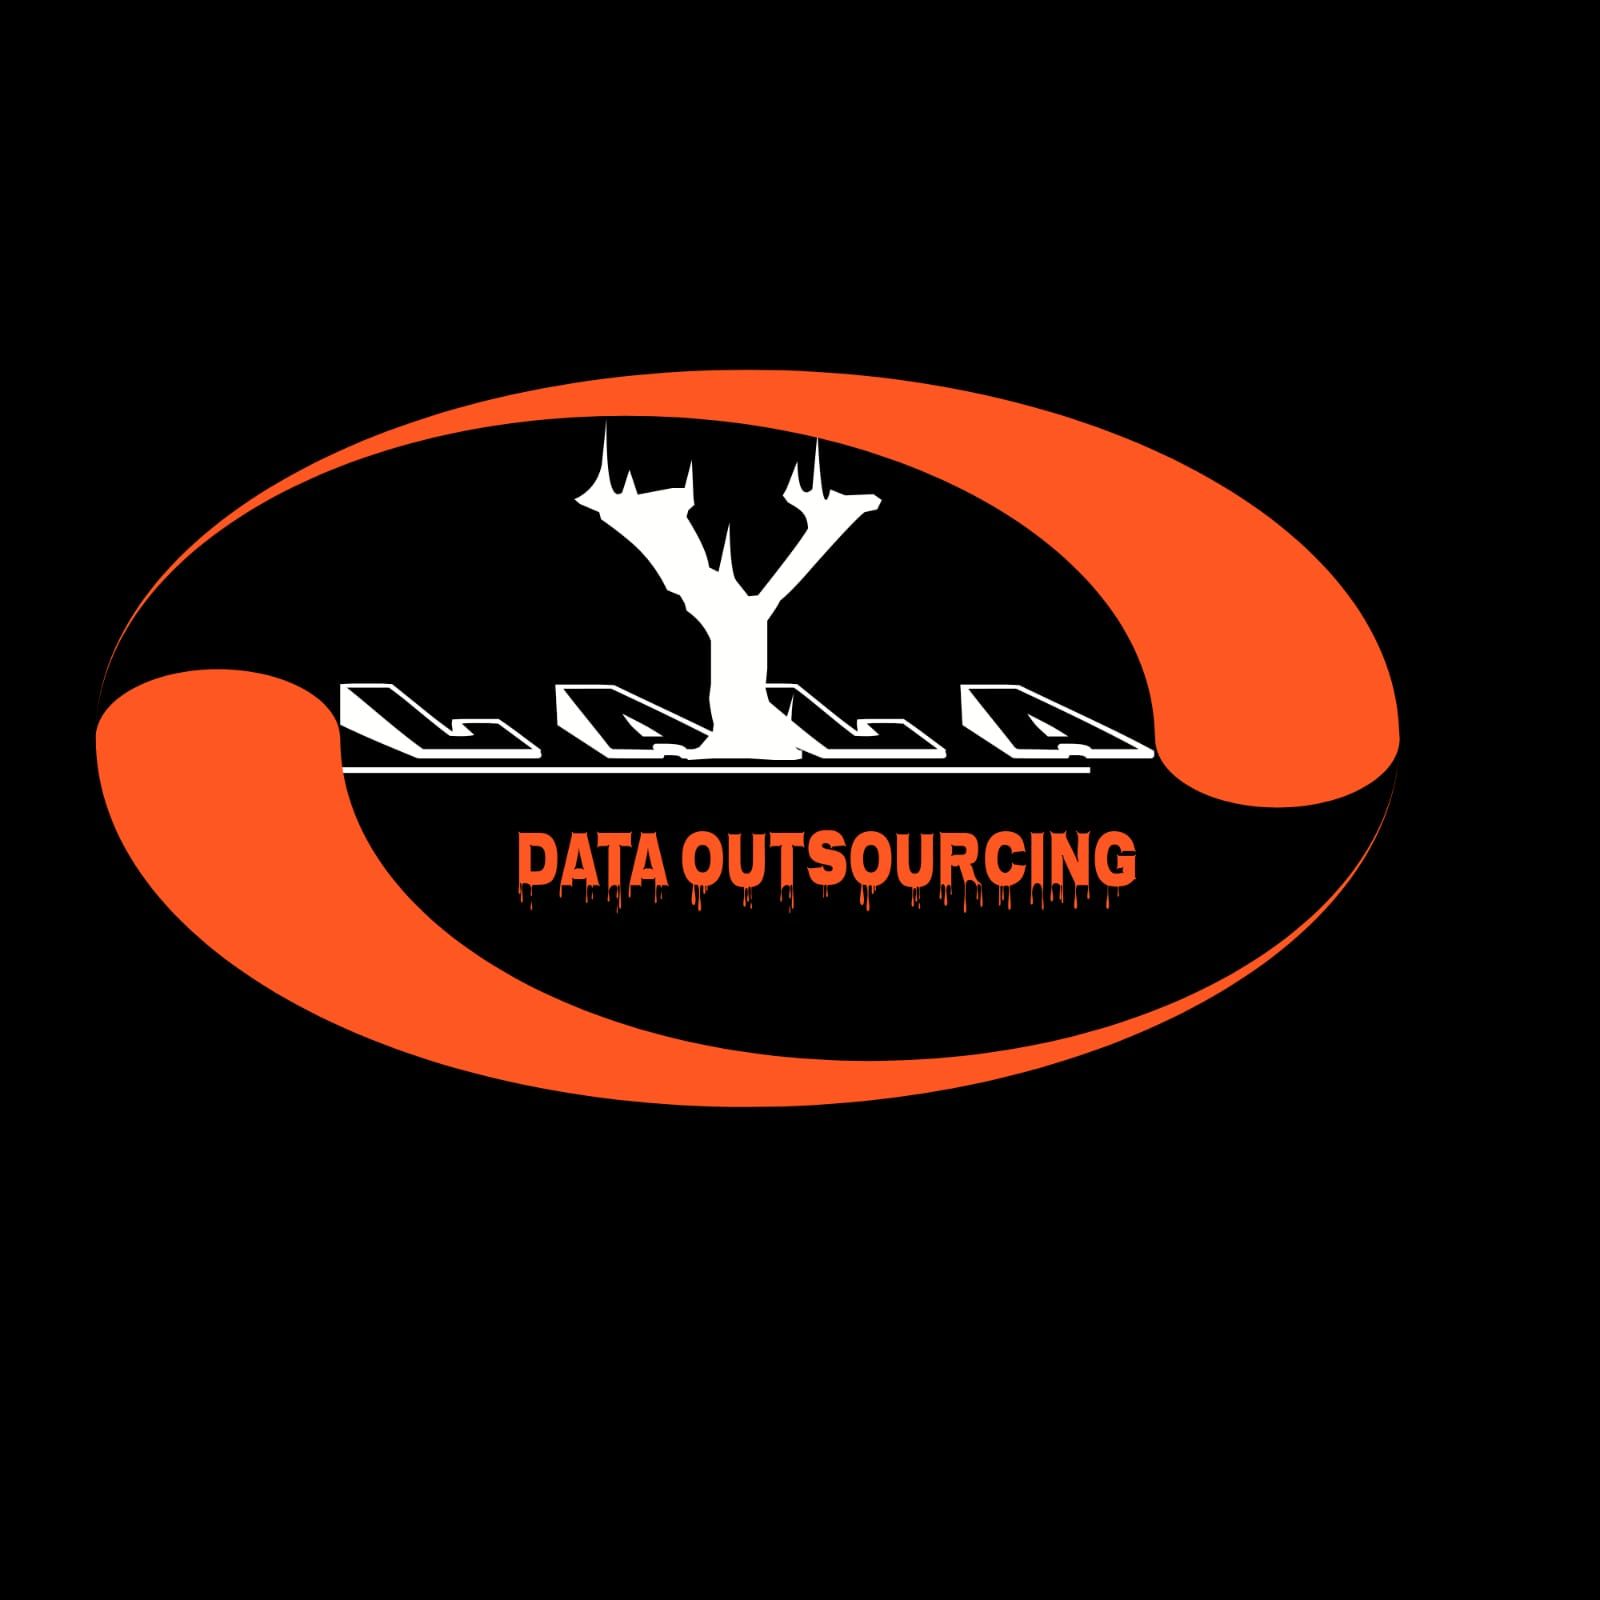 Y LALA DATA OUTSOURCING